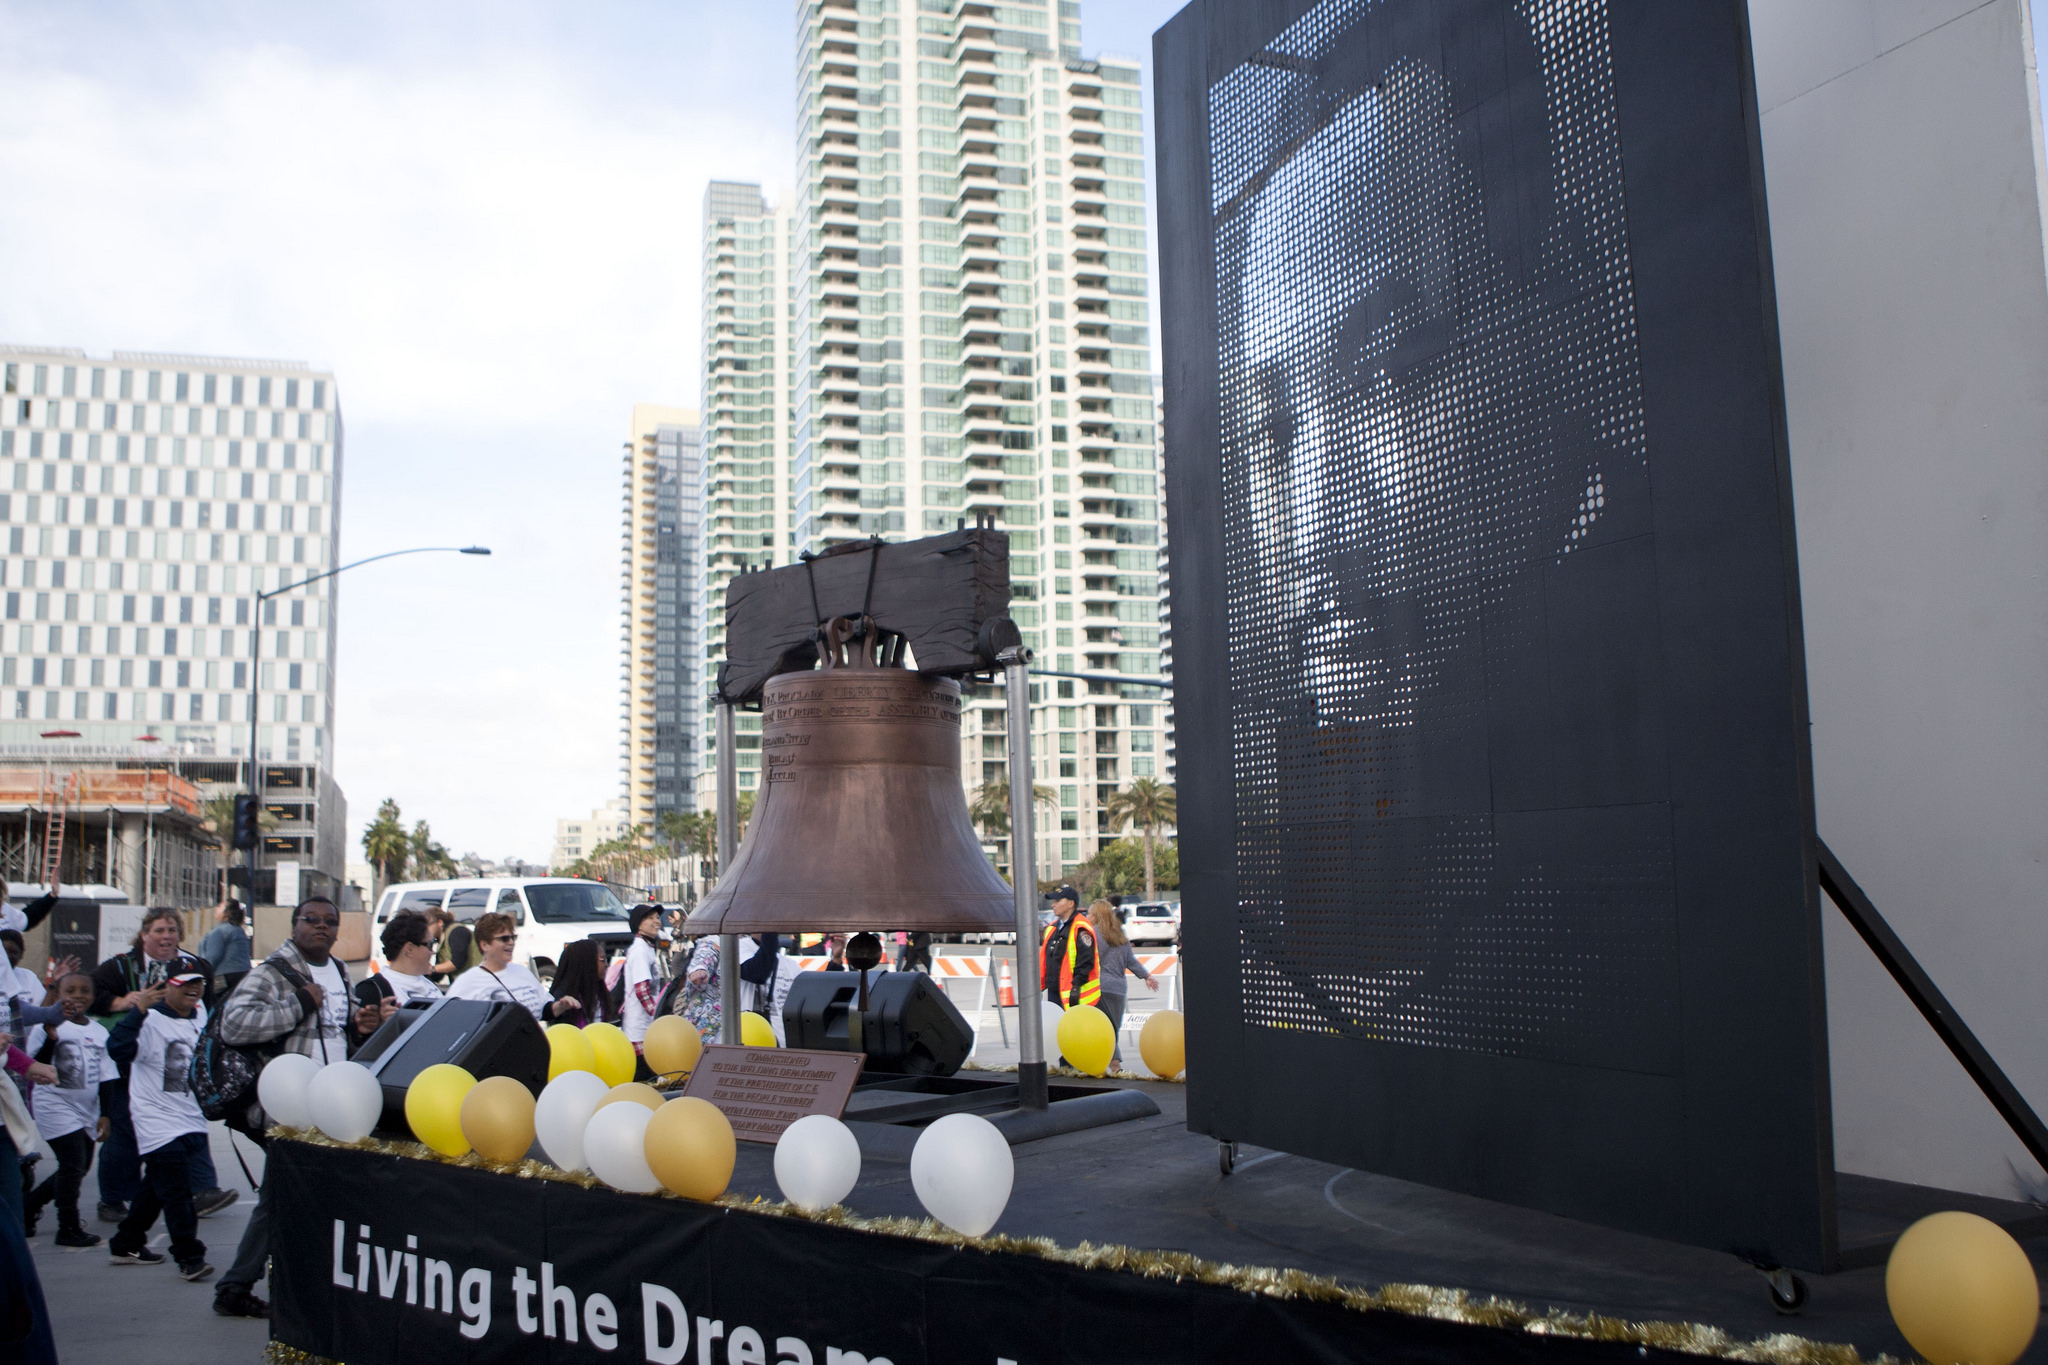 San Diego Continuing Education's MLK float in 2017